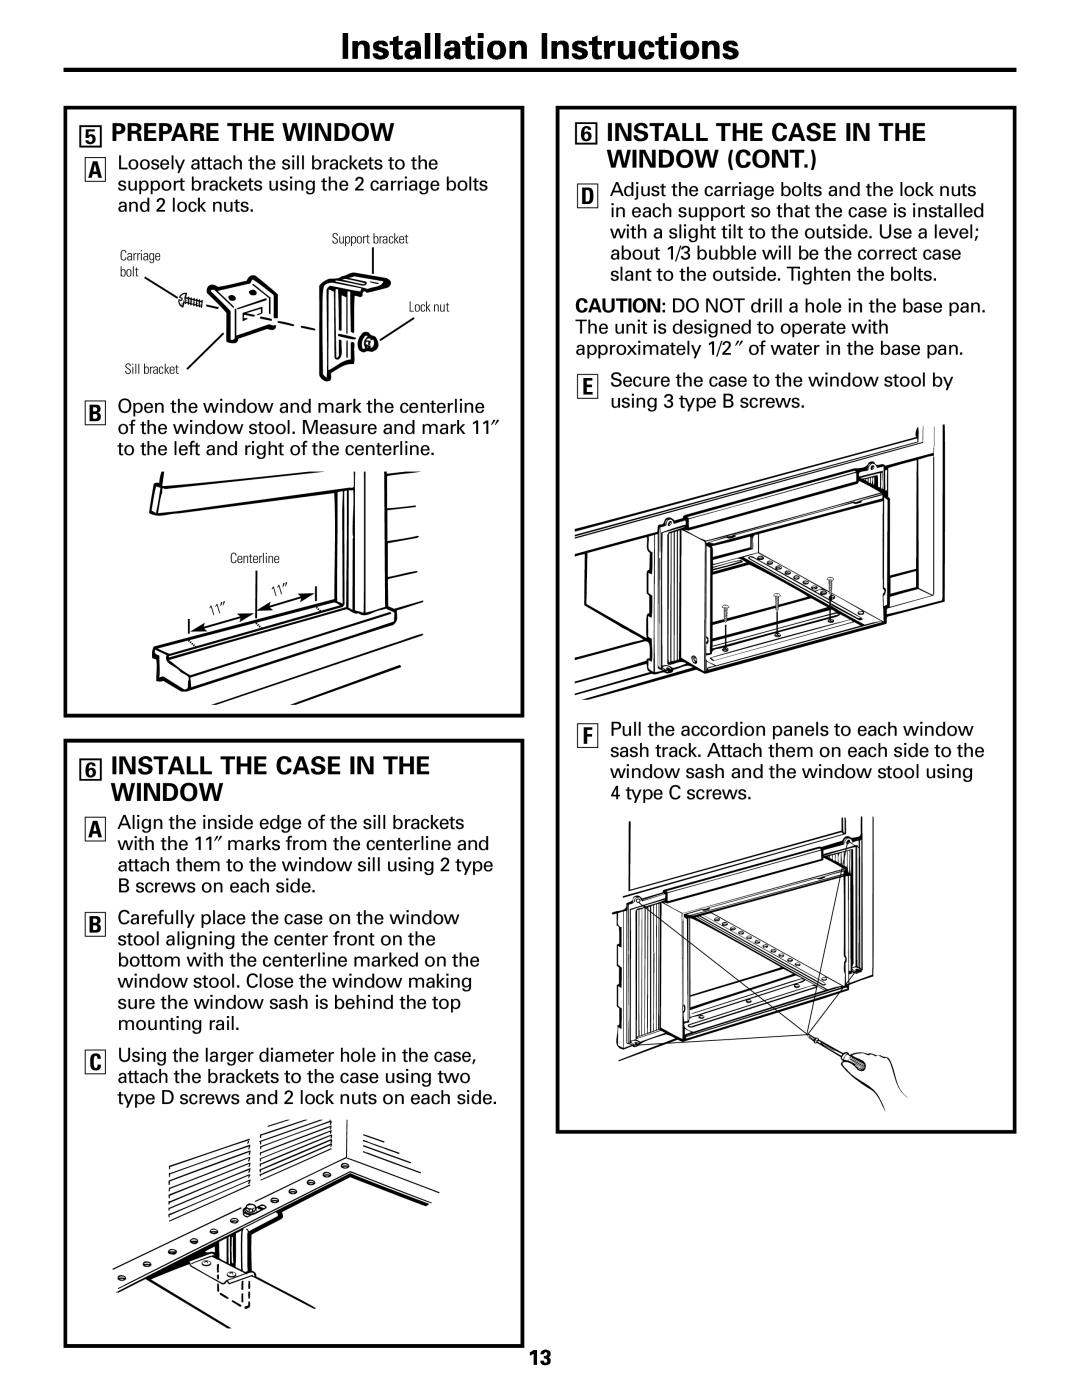 GE AGF18 operating instructions 5PREPARE THE WINDOW, 6INSTALL THE CASE IN THE WINDOW CONT, Installation Instructions 